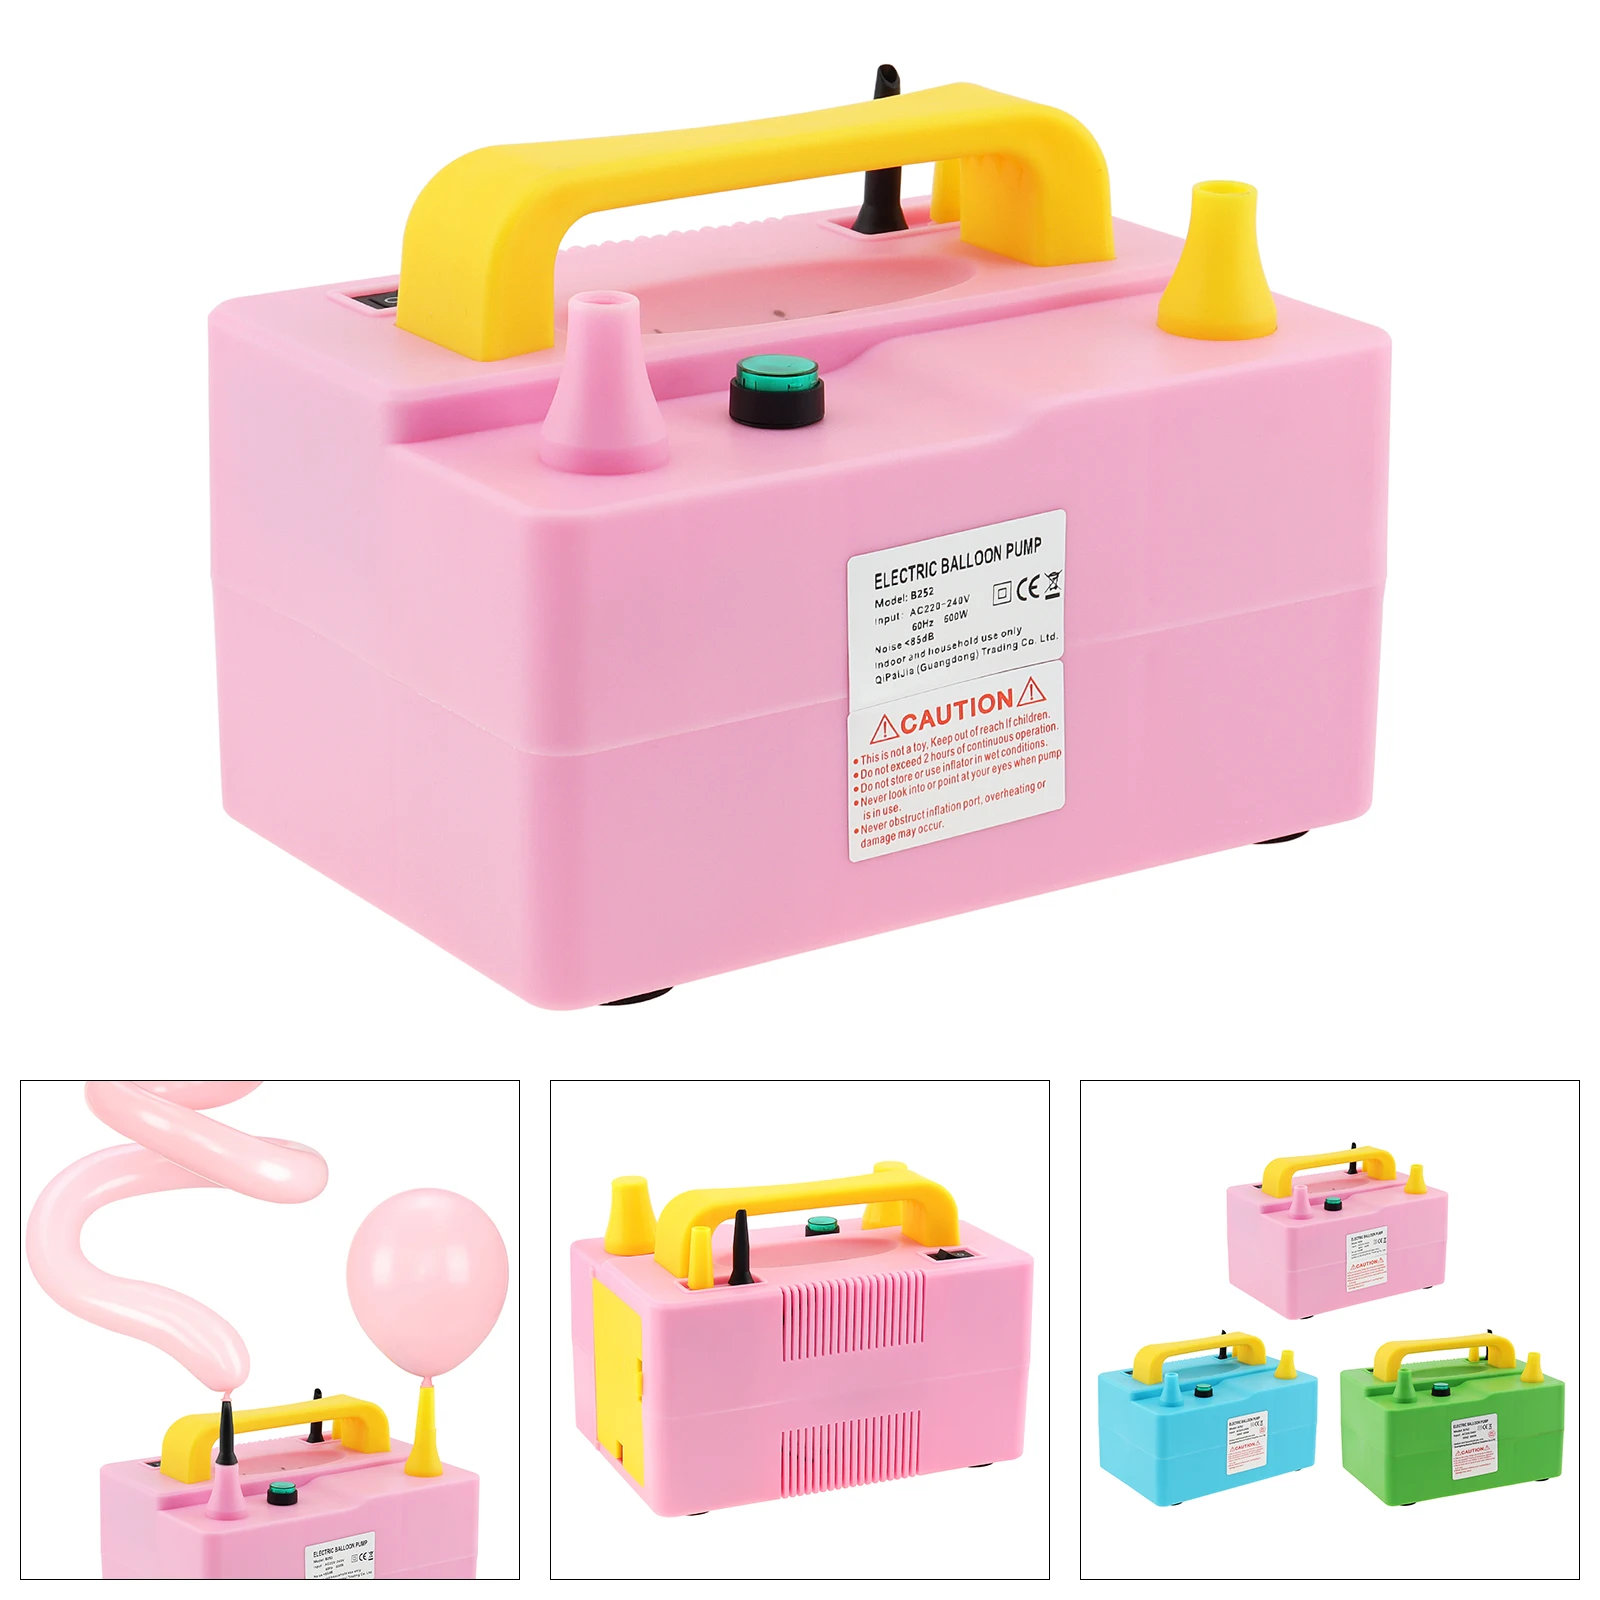 

B252 220V-240V 600W Balloon Air Pump Multifunctional Balloon Inflator with Dual Motor for Party Decoration